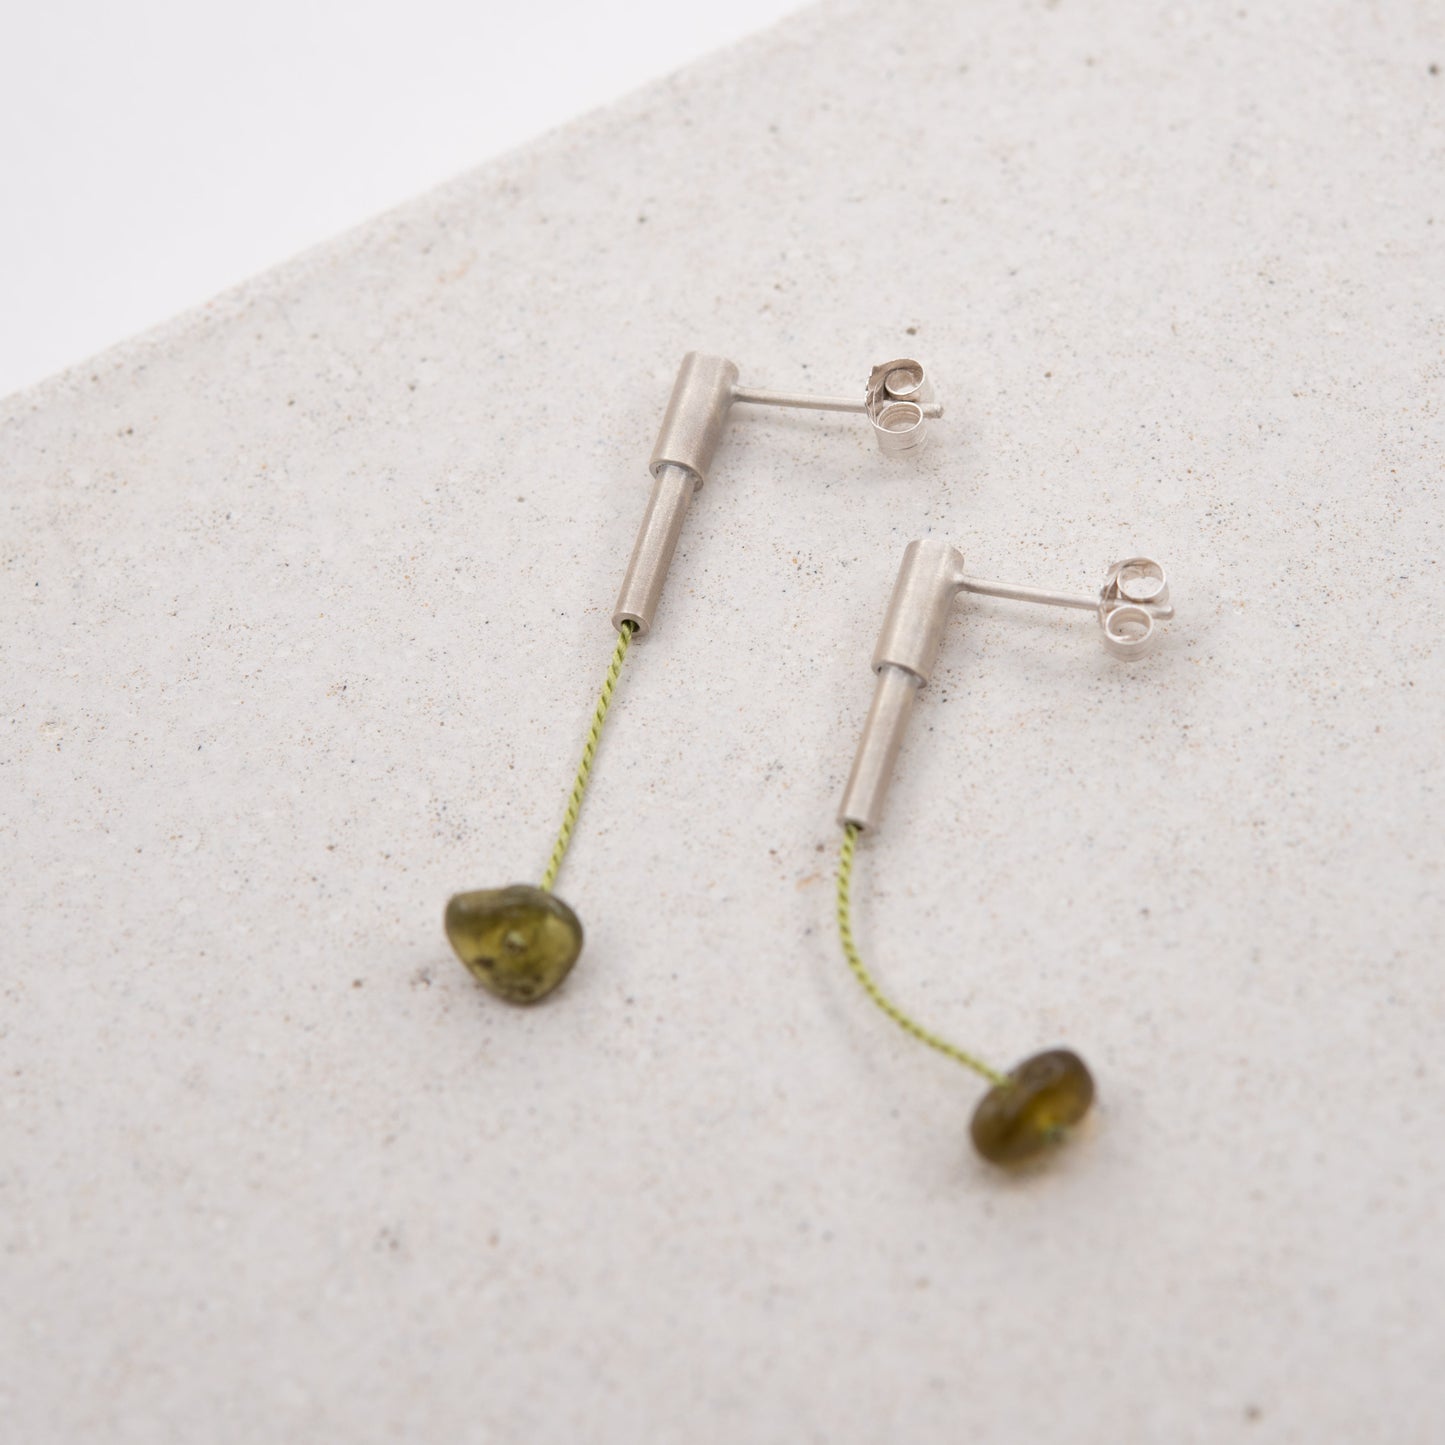 Pair of 37 millimeters length pendant earrings handmade in in Paris by A g J c  from  tube of matte sterling silver with a light green silk cord threaded through the center for hanging a green garnet stone.